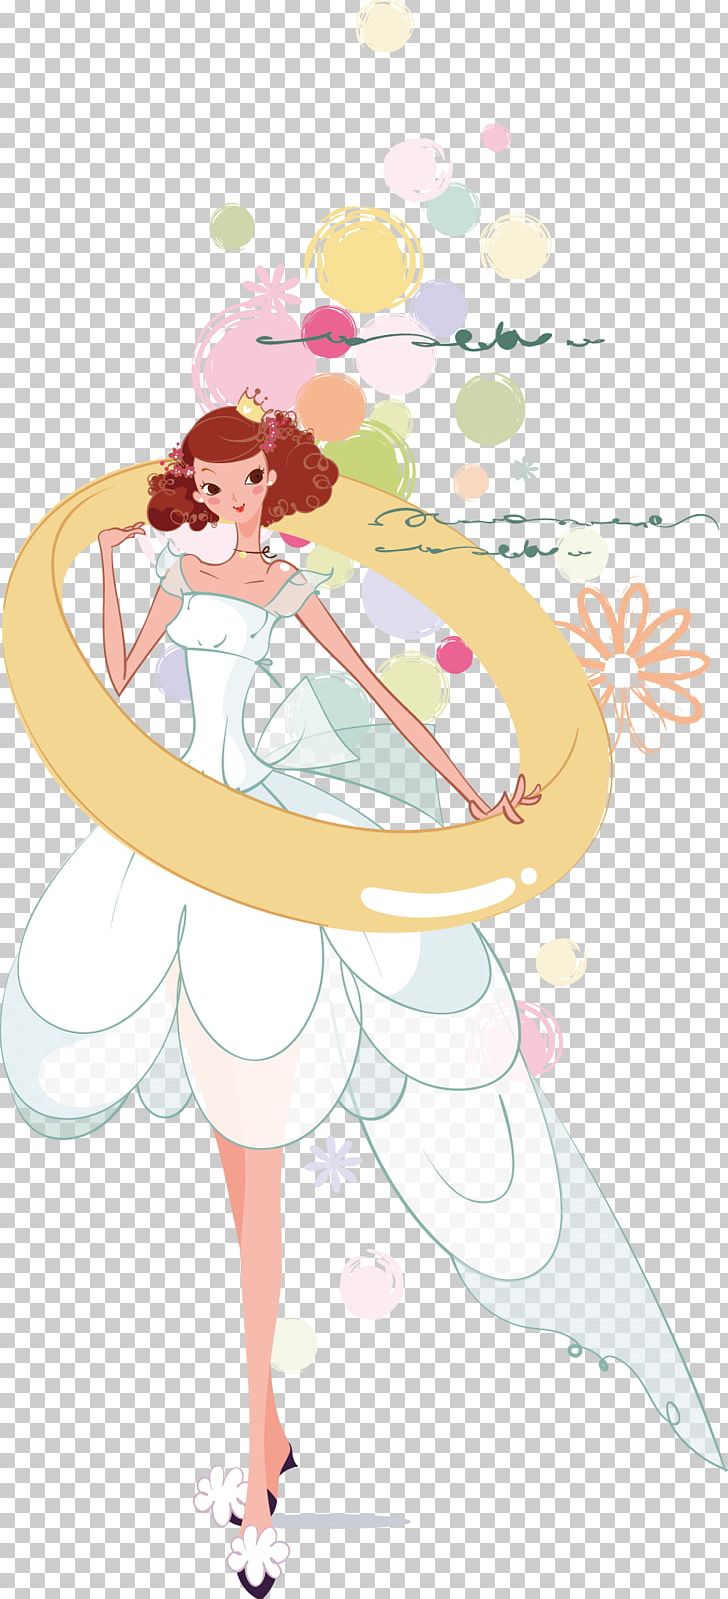 Bride Marriage Wedding Illustration PNG, Clipart, Art, Beauty, Bride And Groom, Brides, Bubble Free PNG Download